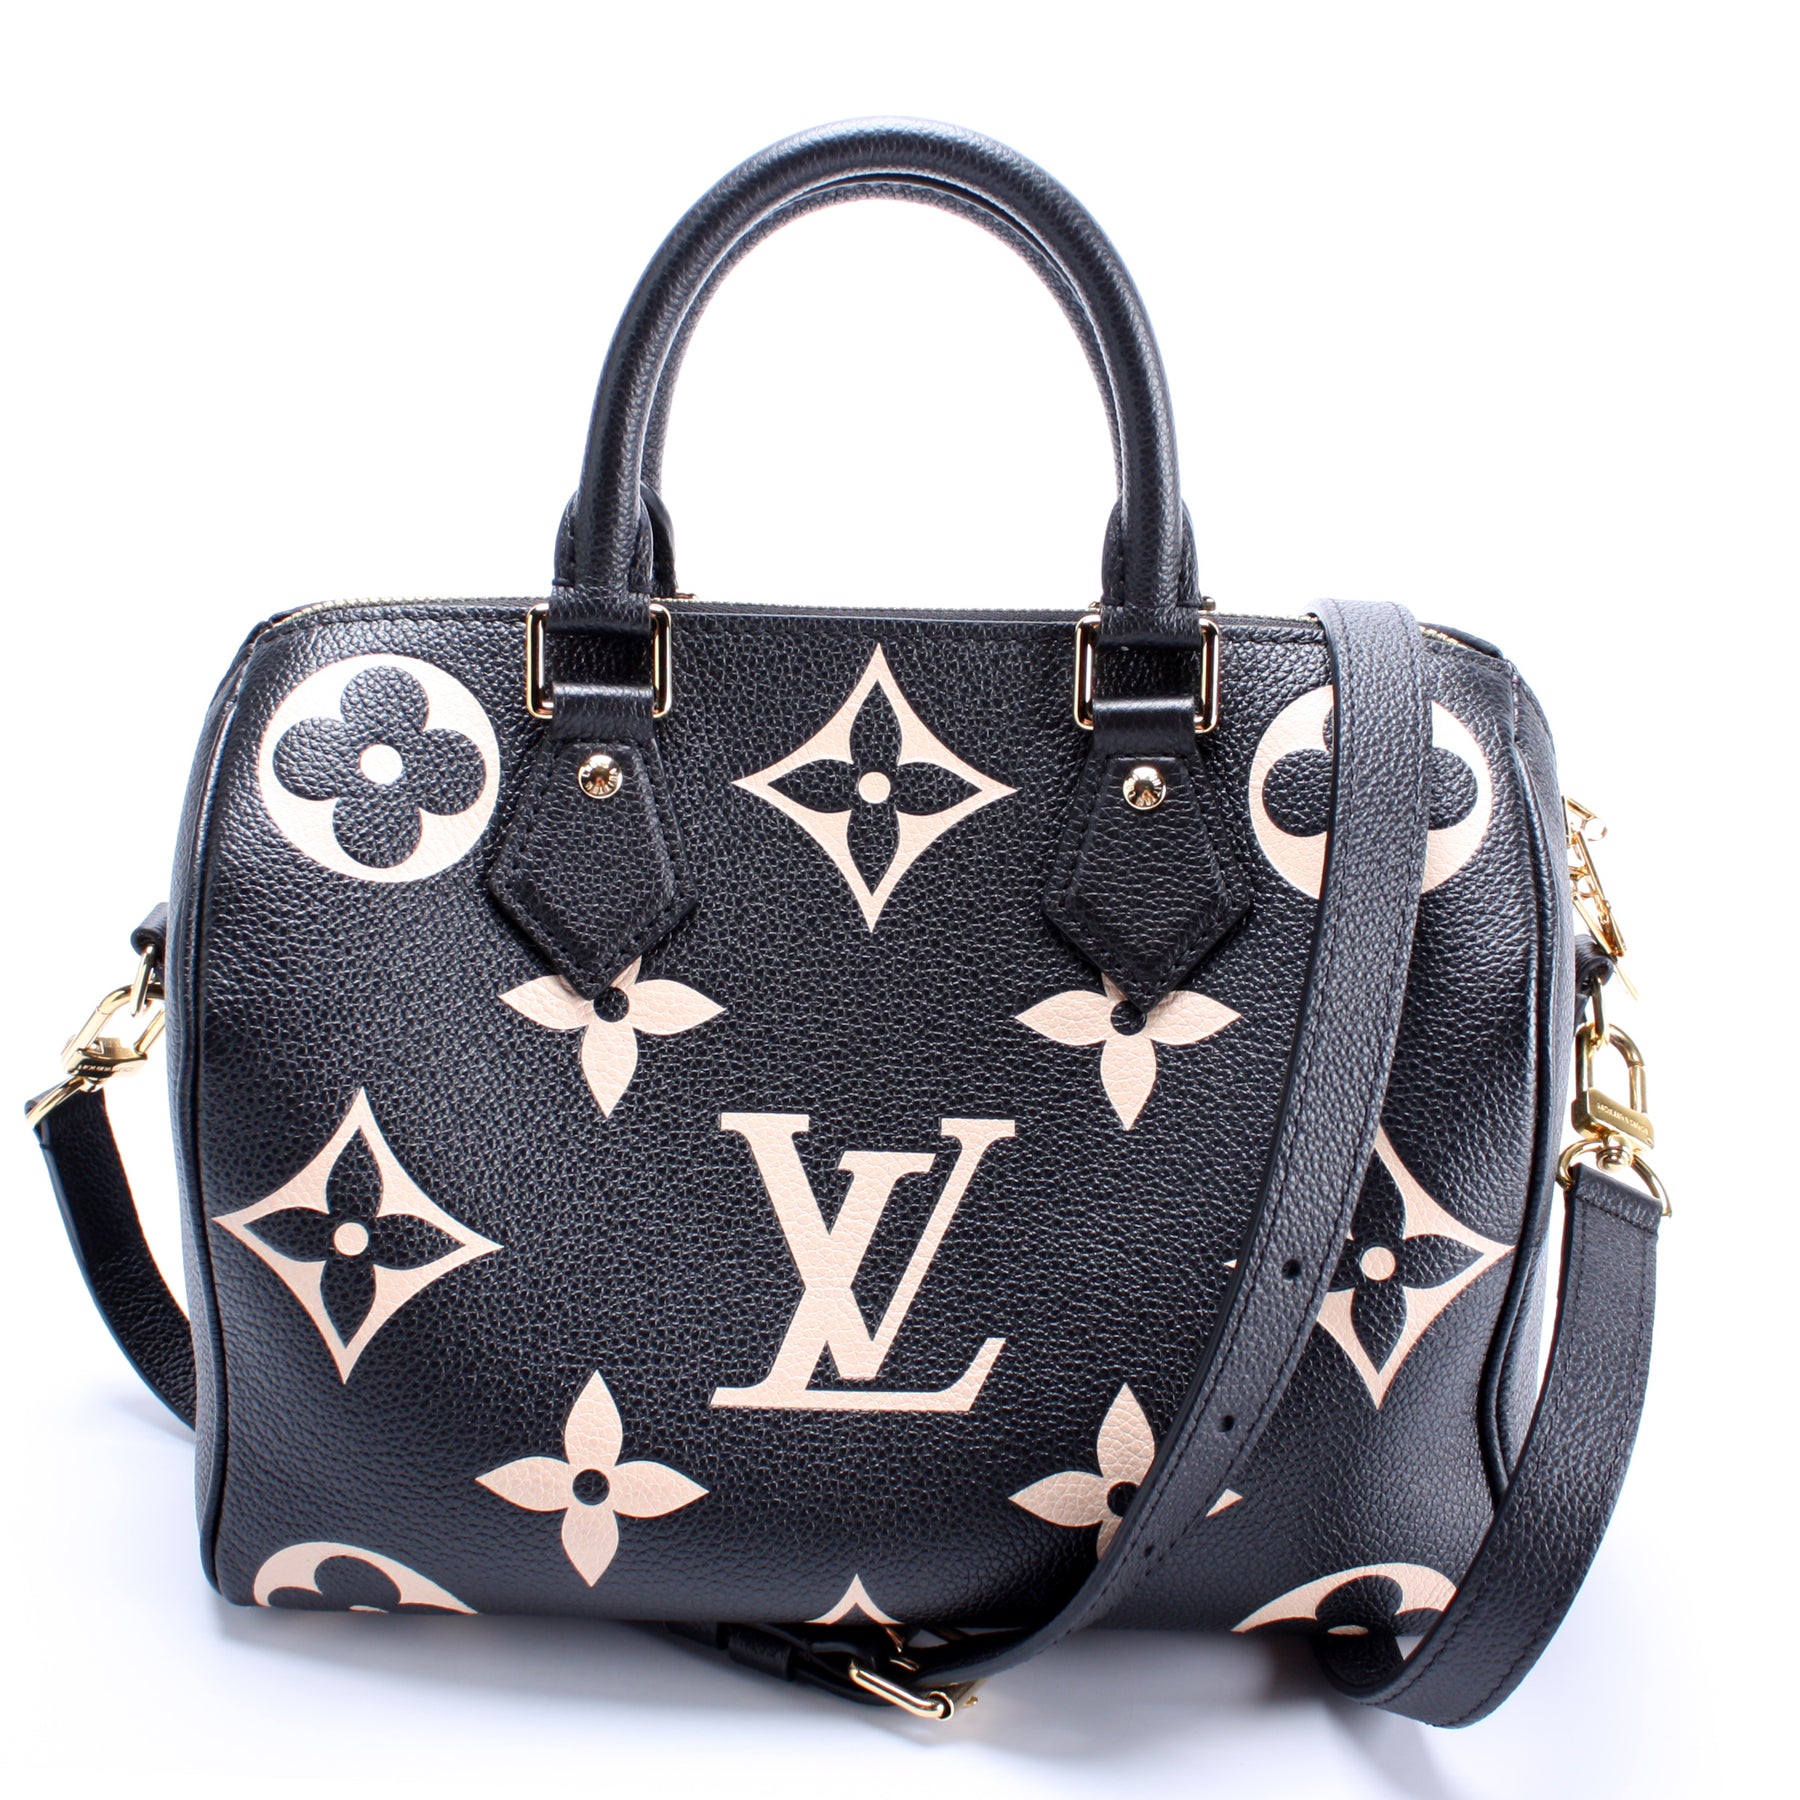 Versatile Louis Vuitton Empreinte Speedy 25. Love that it can be used with  both casua…